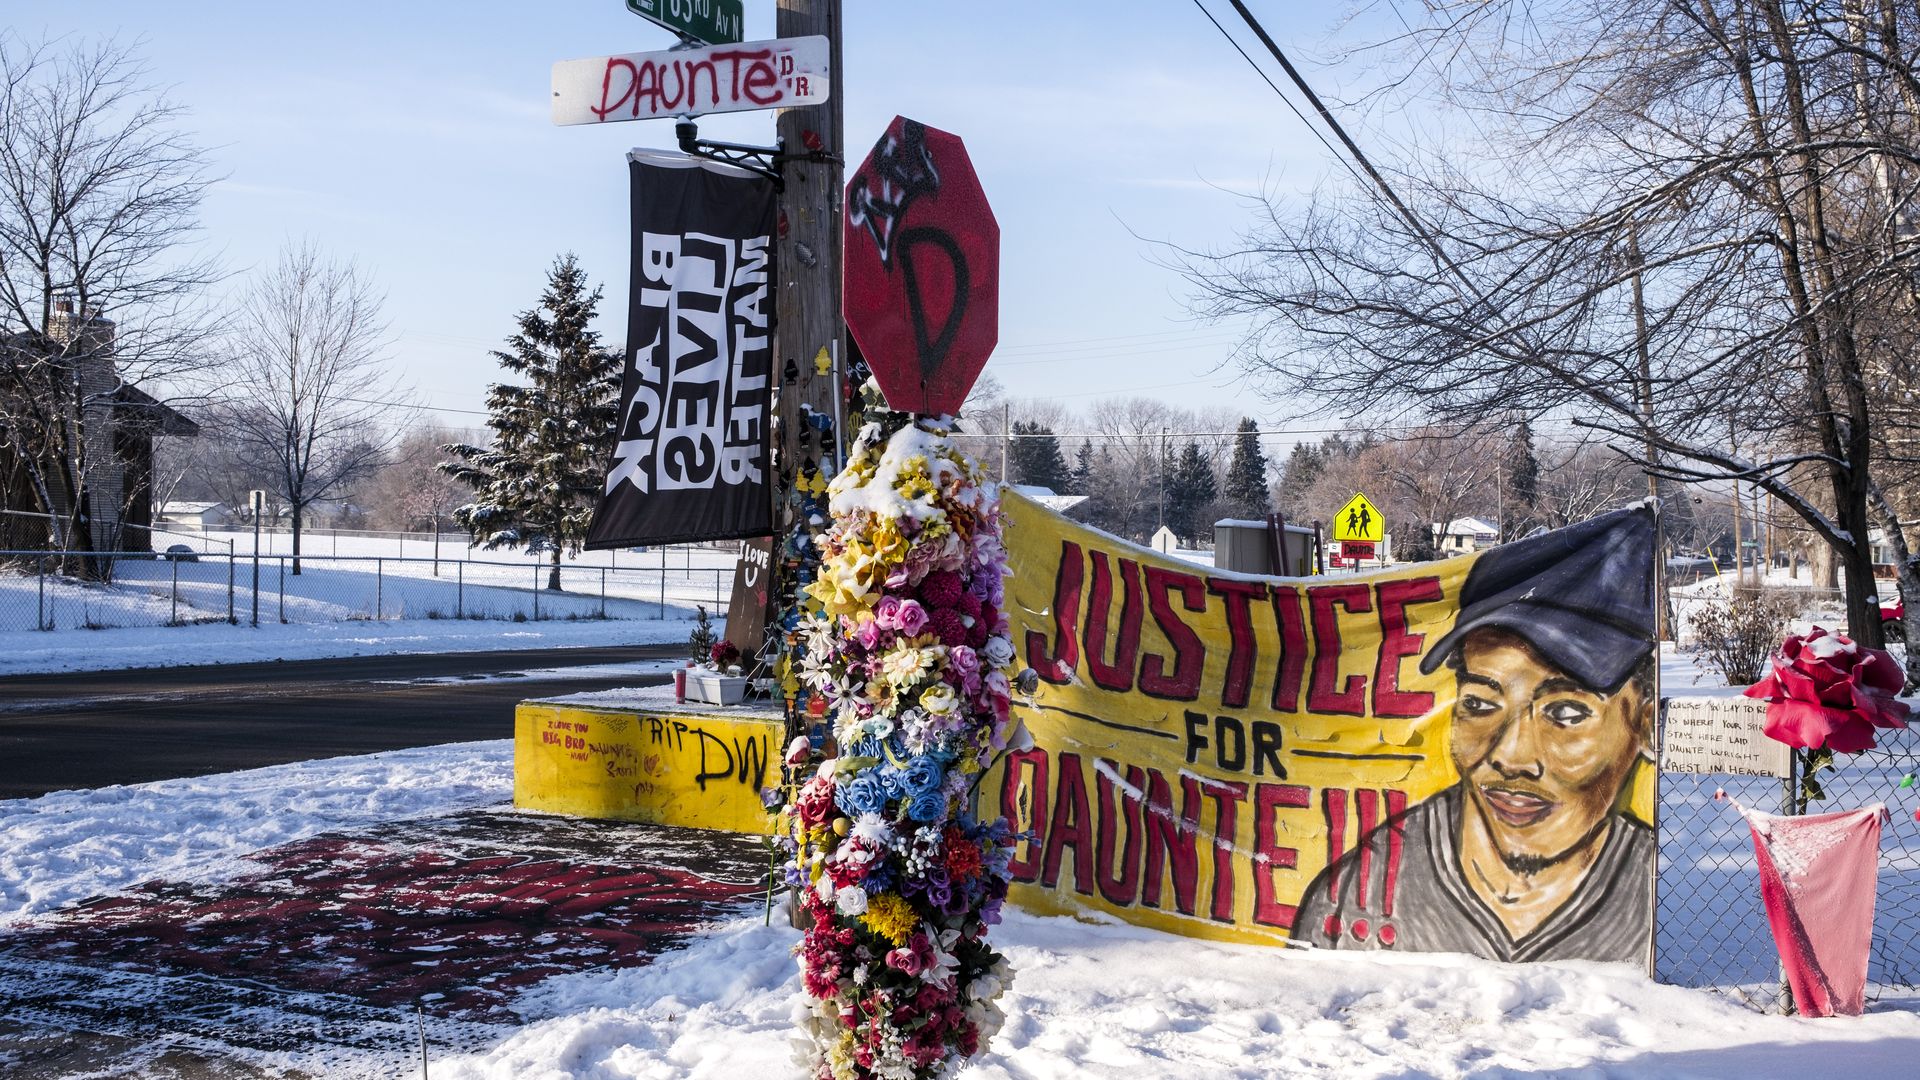 Picture of a yellow sign that says "justice for daunte" along with a BLM flag and flowers